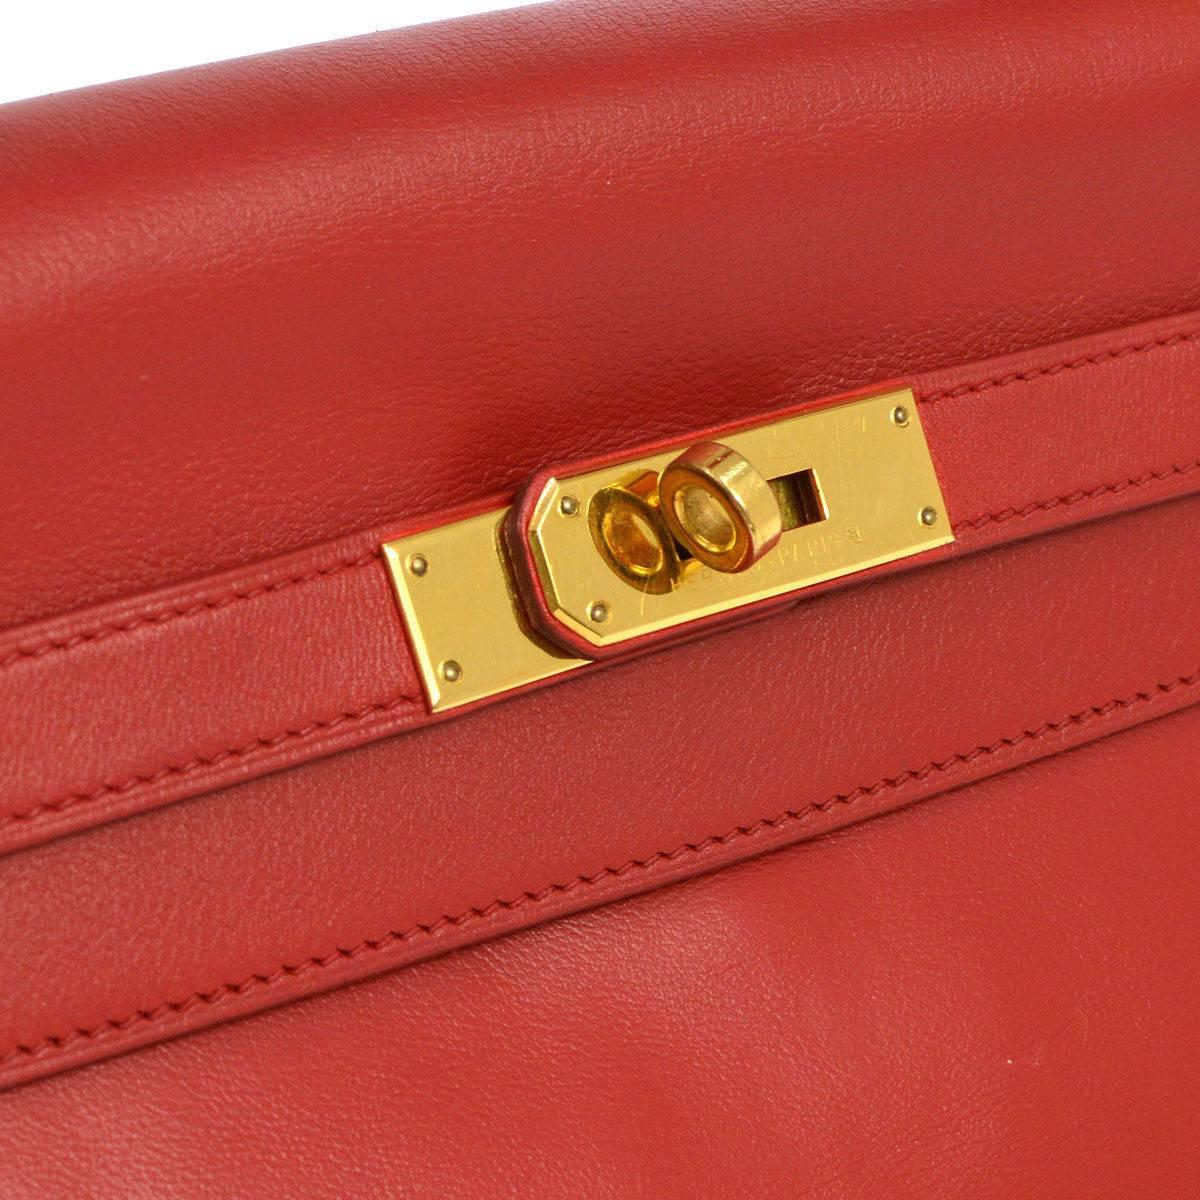 Hermes Kelly 32 Rouge Red Leather Evening Top Handle Satchel Flap Bag in Box

Box calf leather
Gold tone hardware
Leather lining
Date code Circle Z
Made in France
Handle drop 5